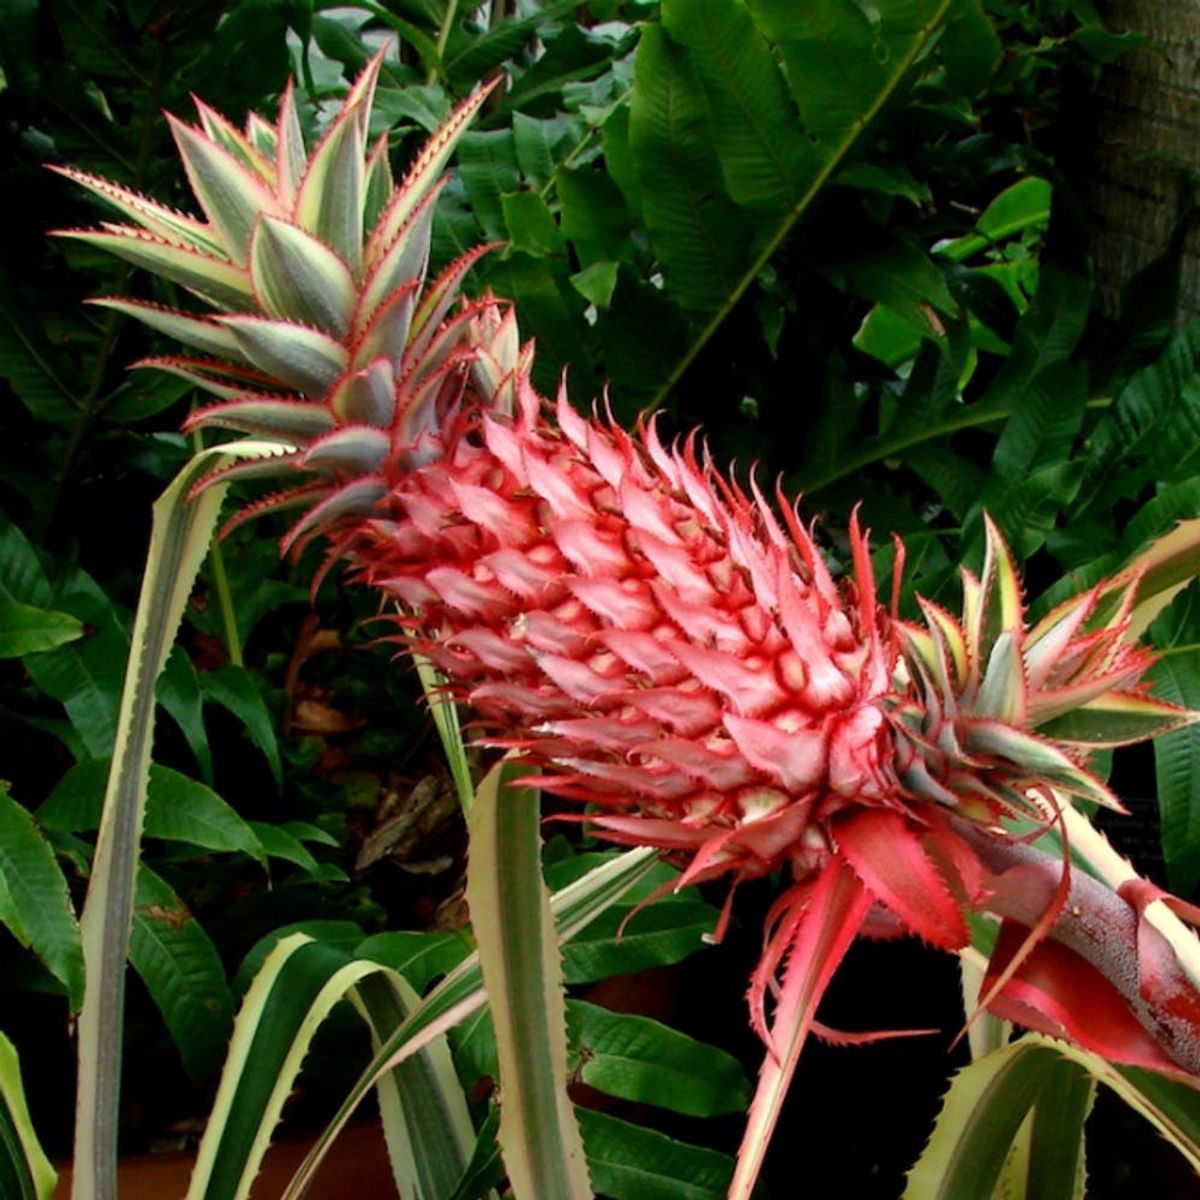 Why You Should Consider Eating GMO Pink “Rose” Pineapples